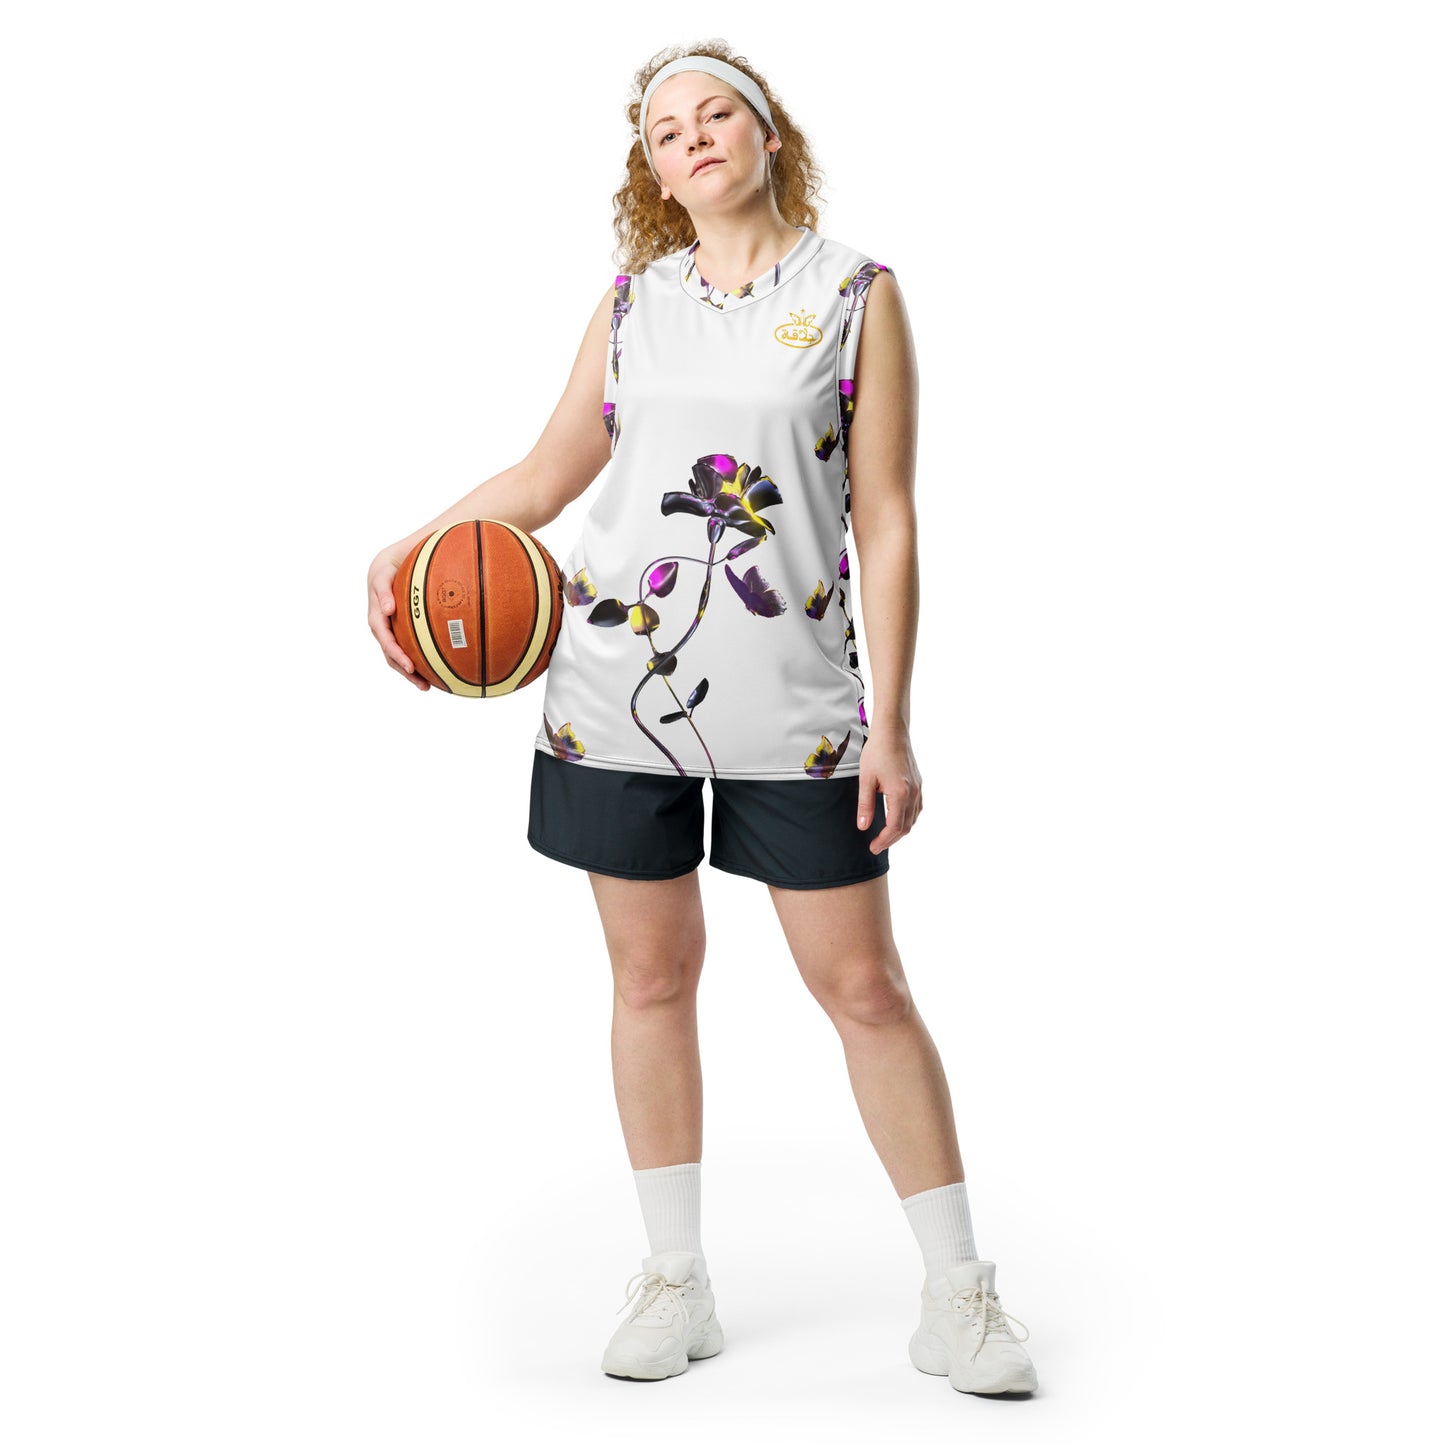 UNISEX BASKETBALL RECYCLED JERSEY